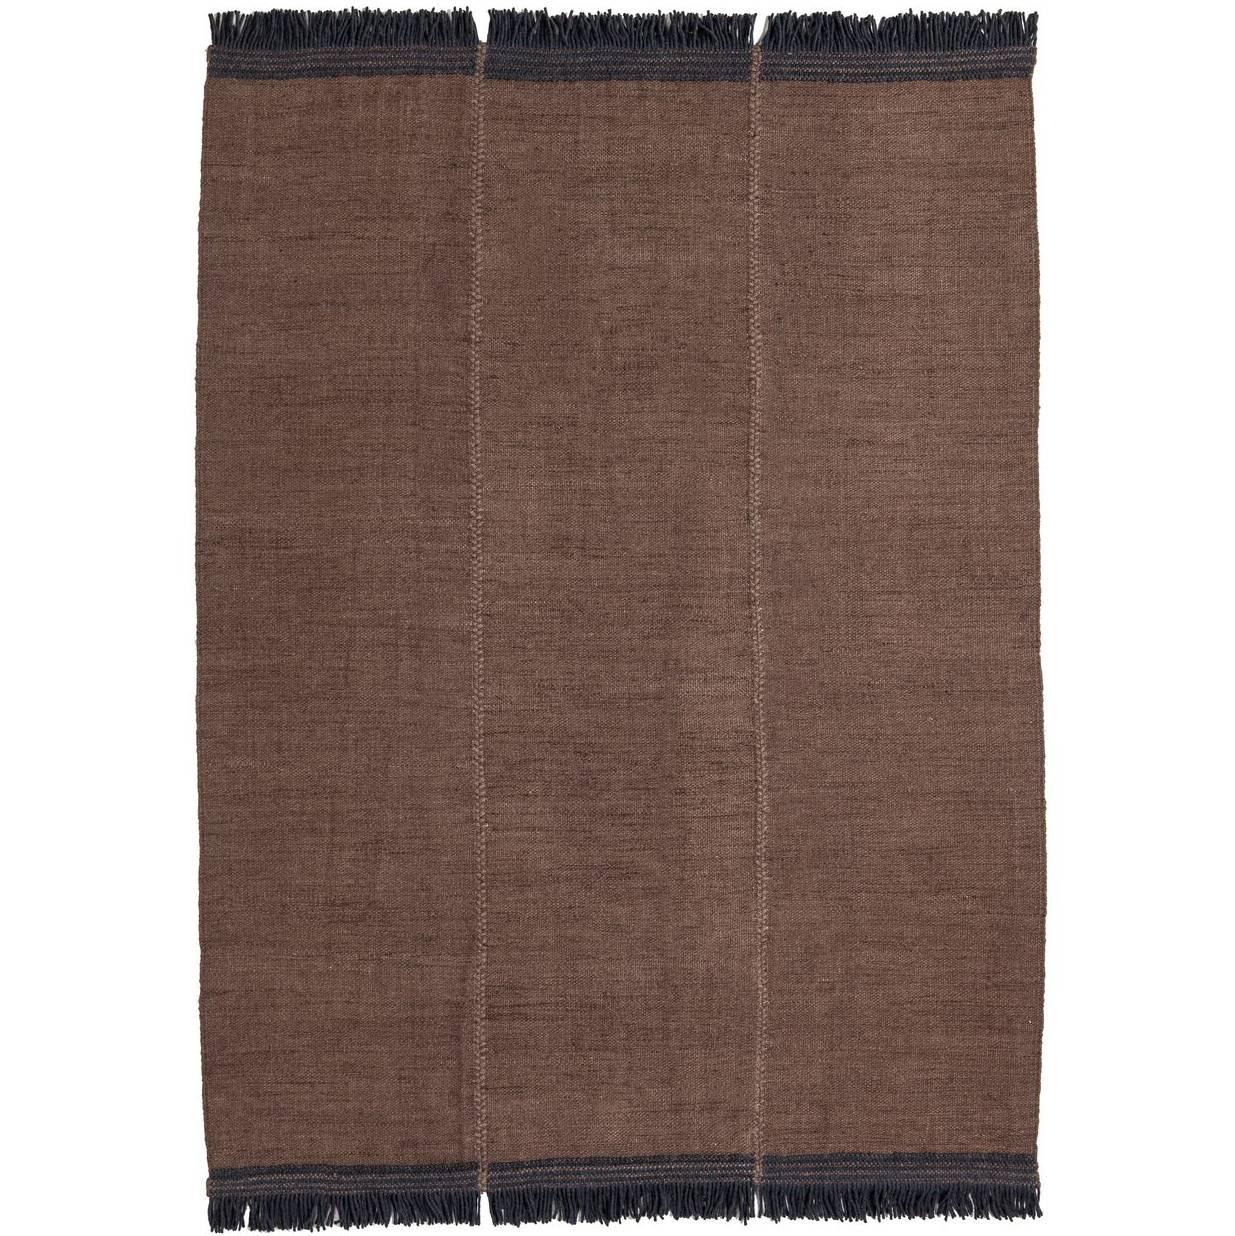 Mia Brown Hand-Loomed Wool Dhurrie Rug by Nani Marquina, Small For Sale